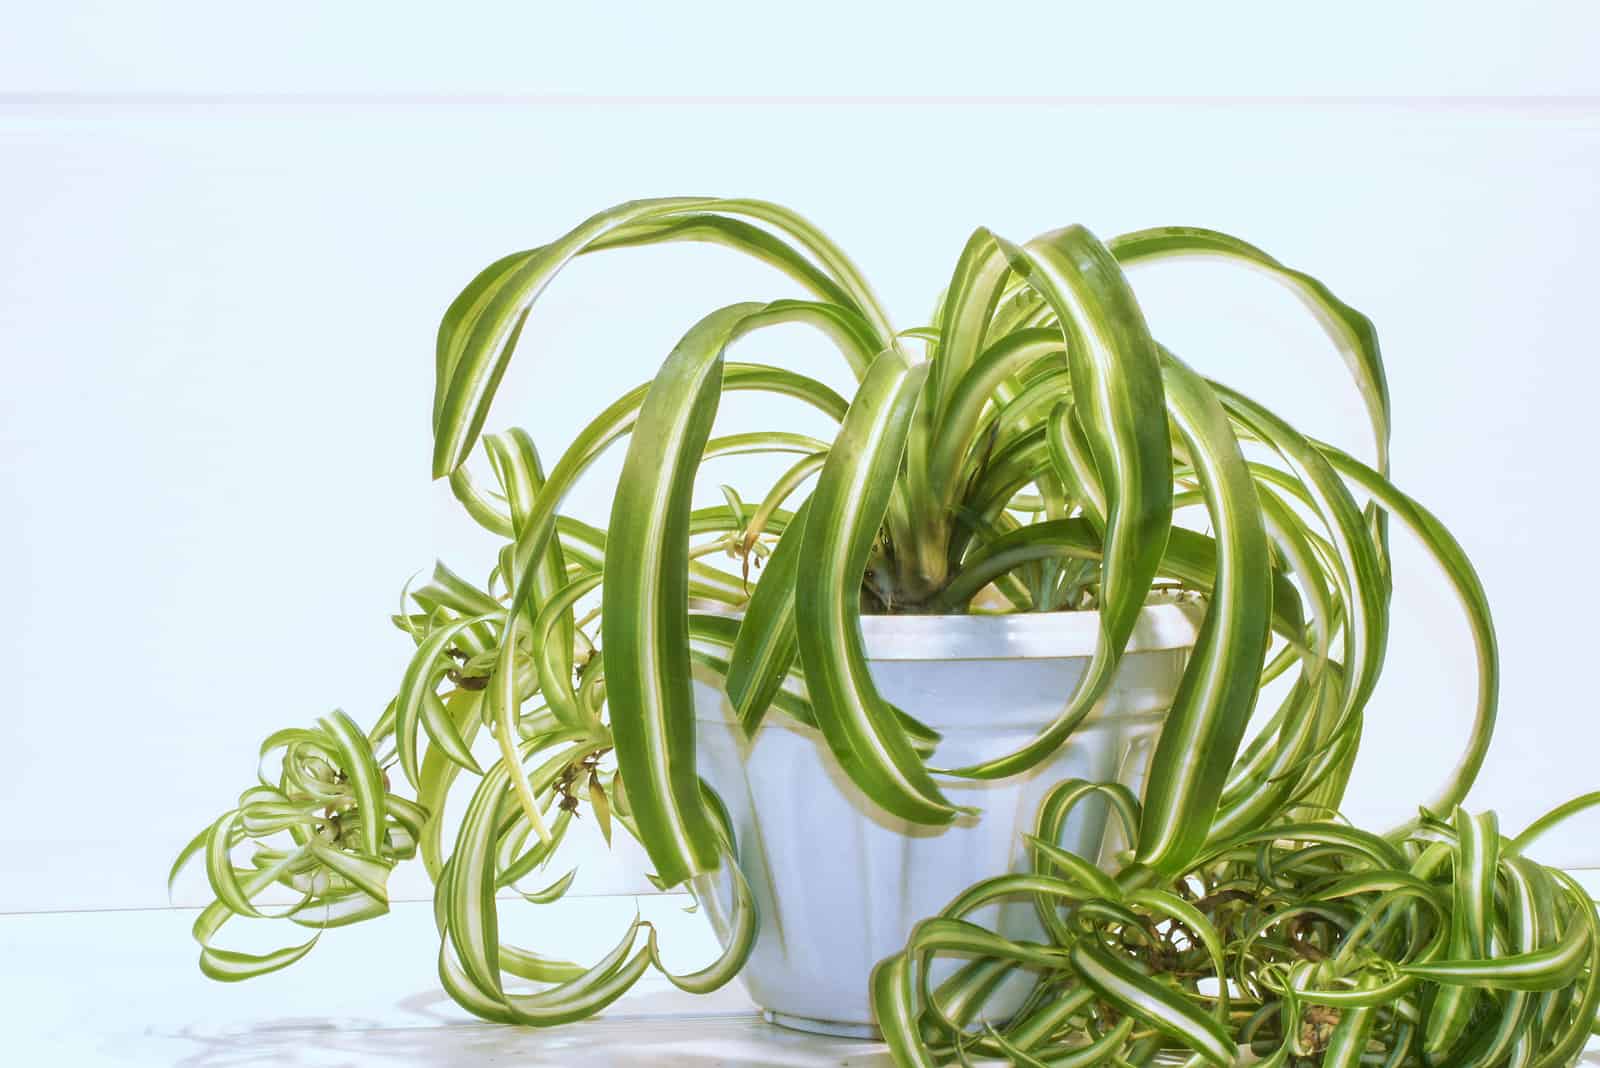 Why Is My Spider Plant Dying? 11 Reasons And Easy Solutions